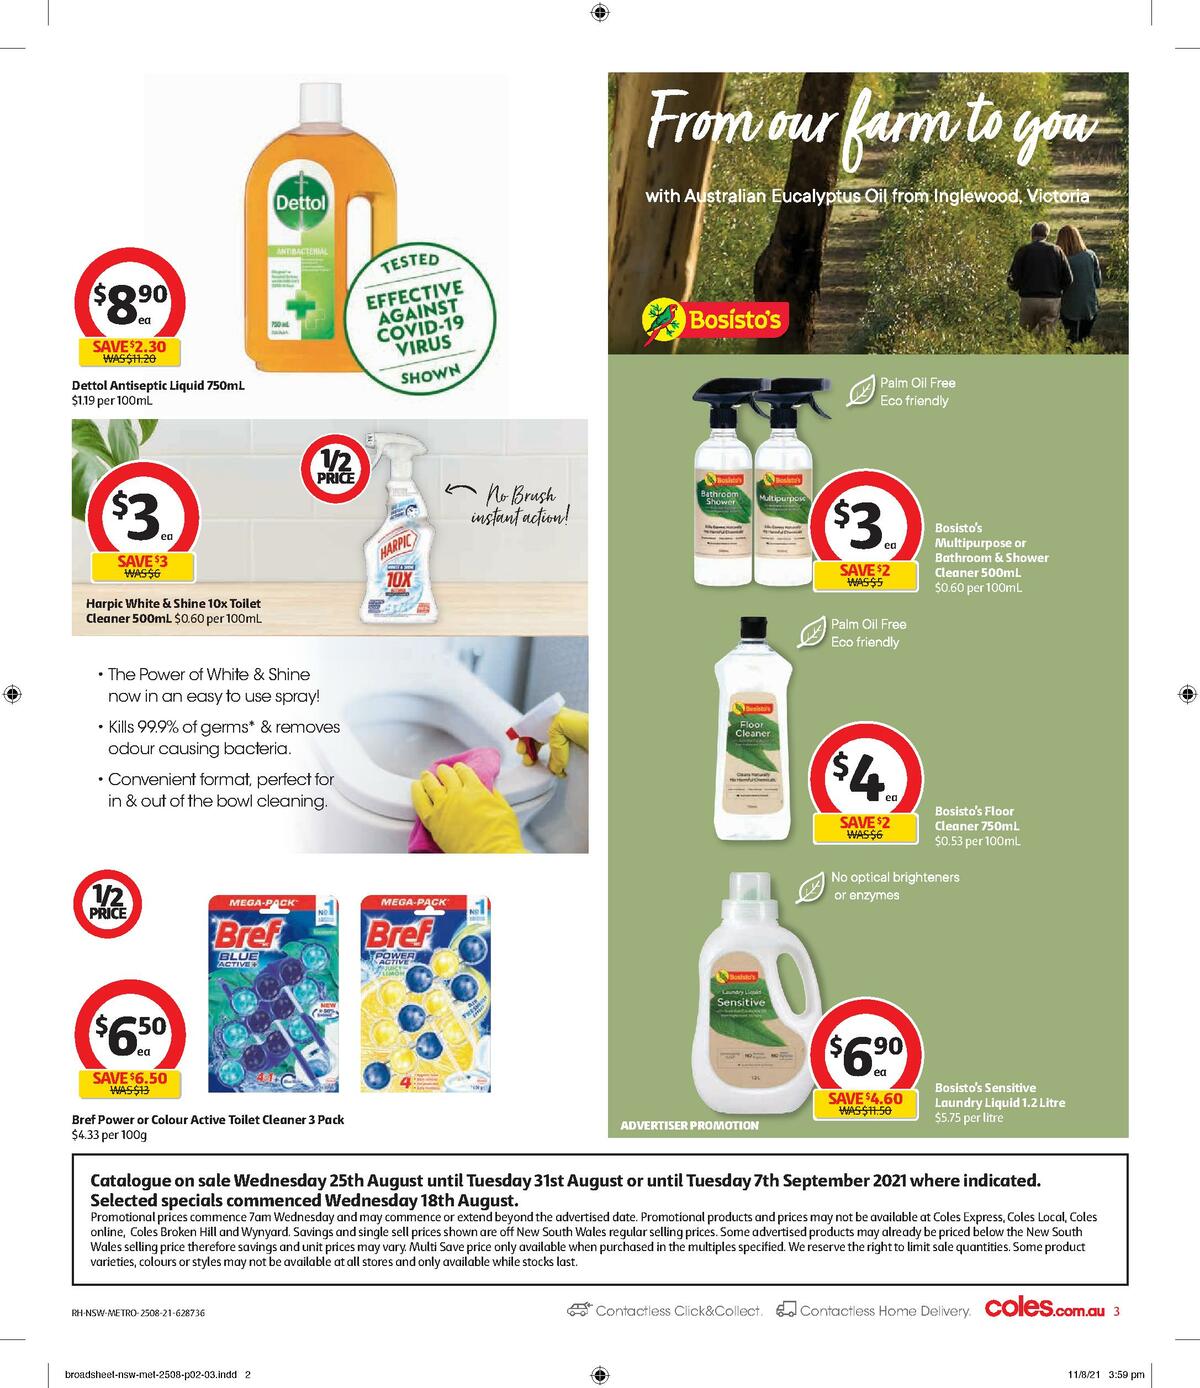 Coles Spring Cleaning Essentials Catalogues from 25 August